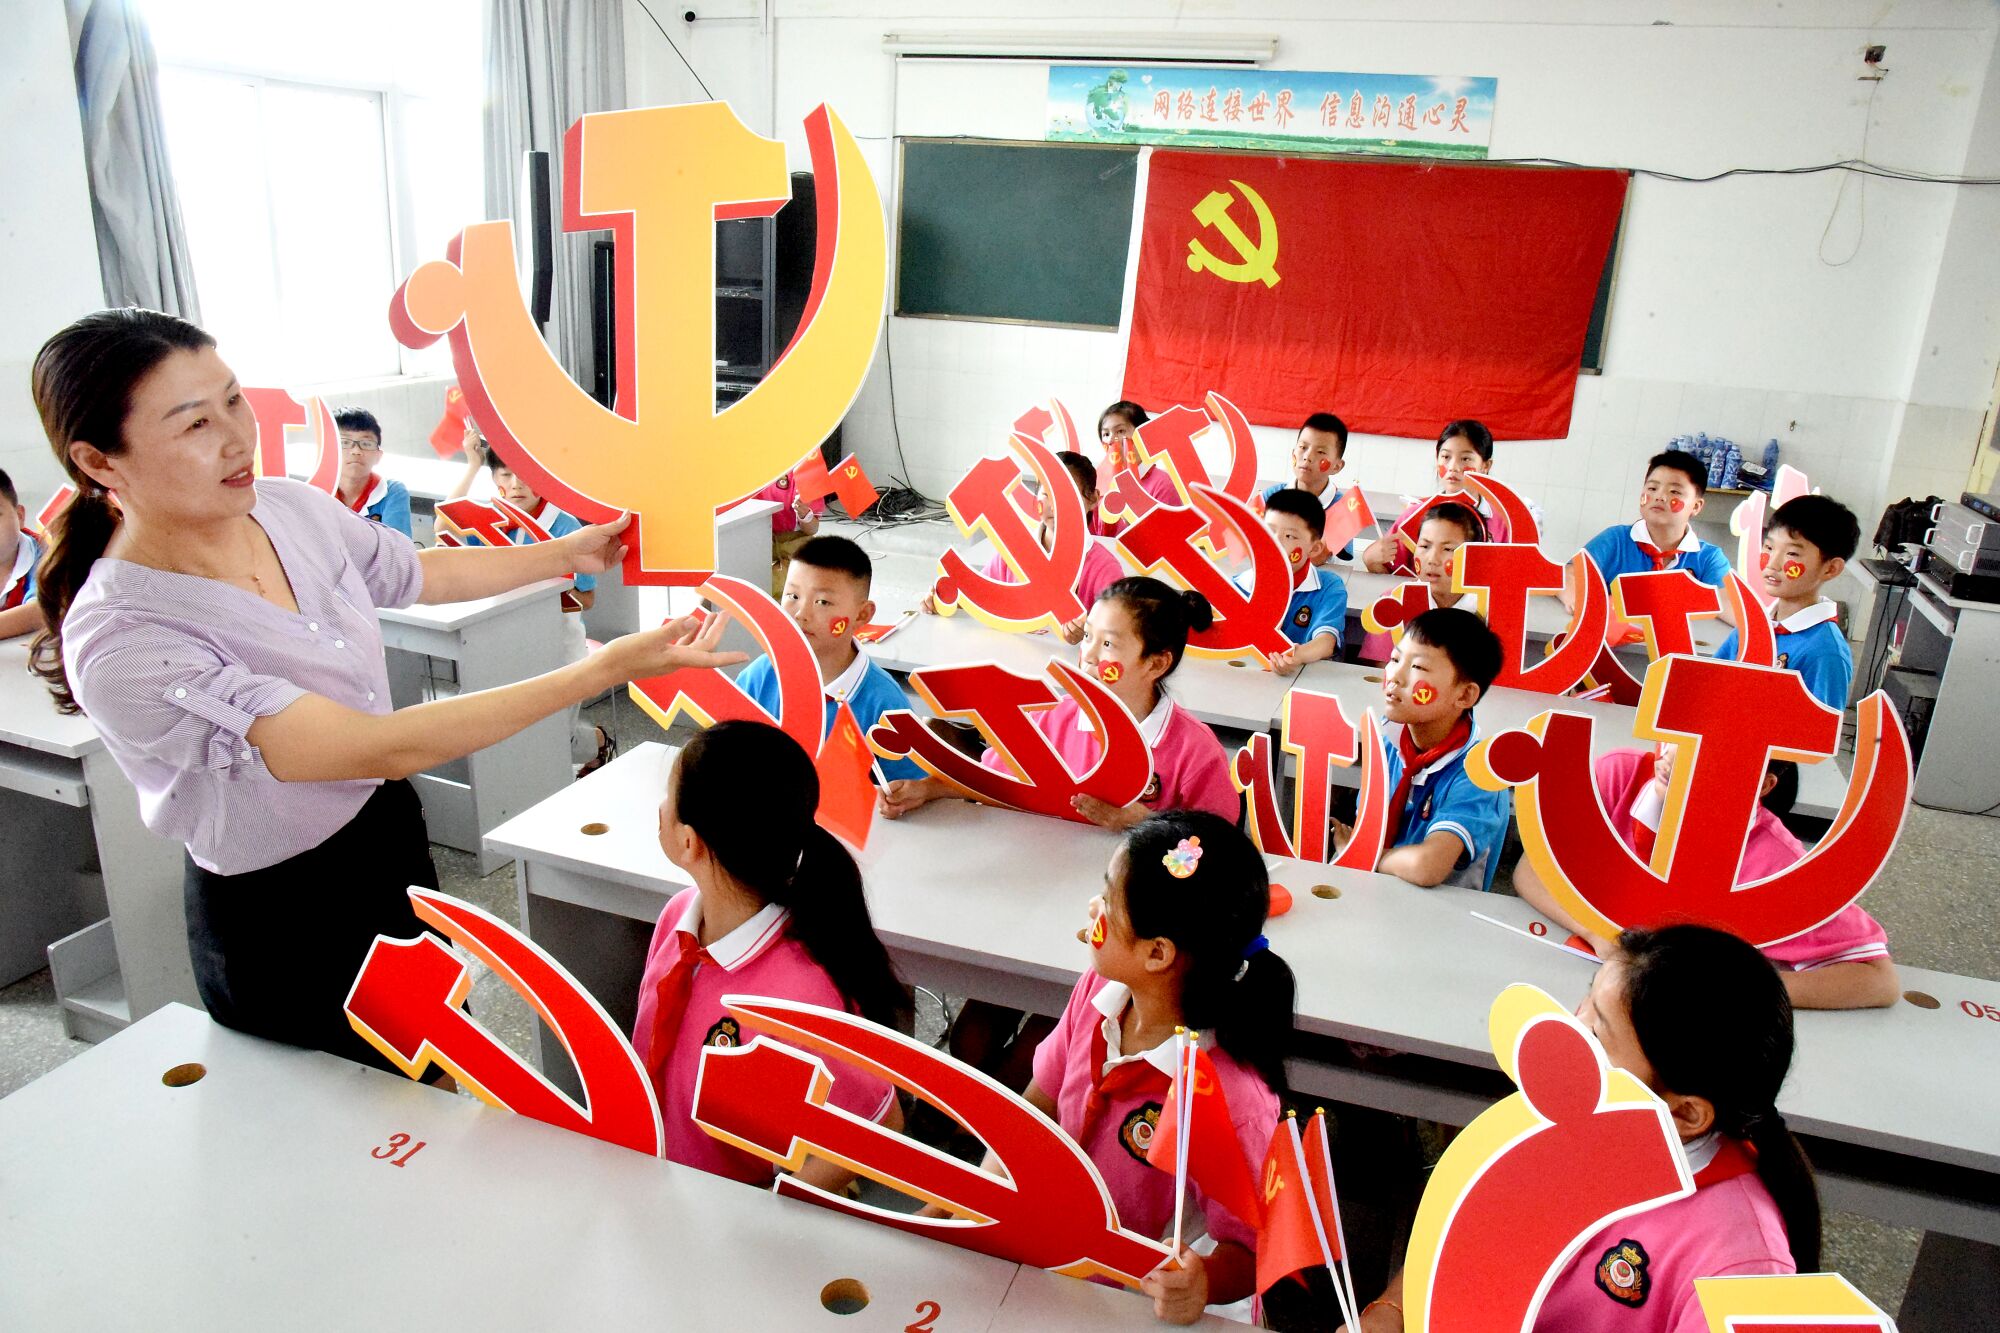 A woman holds a hammer and sickle emblem as children watch, holding their own red-and-gold emblems 